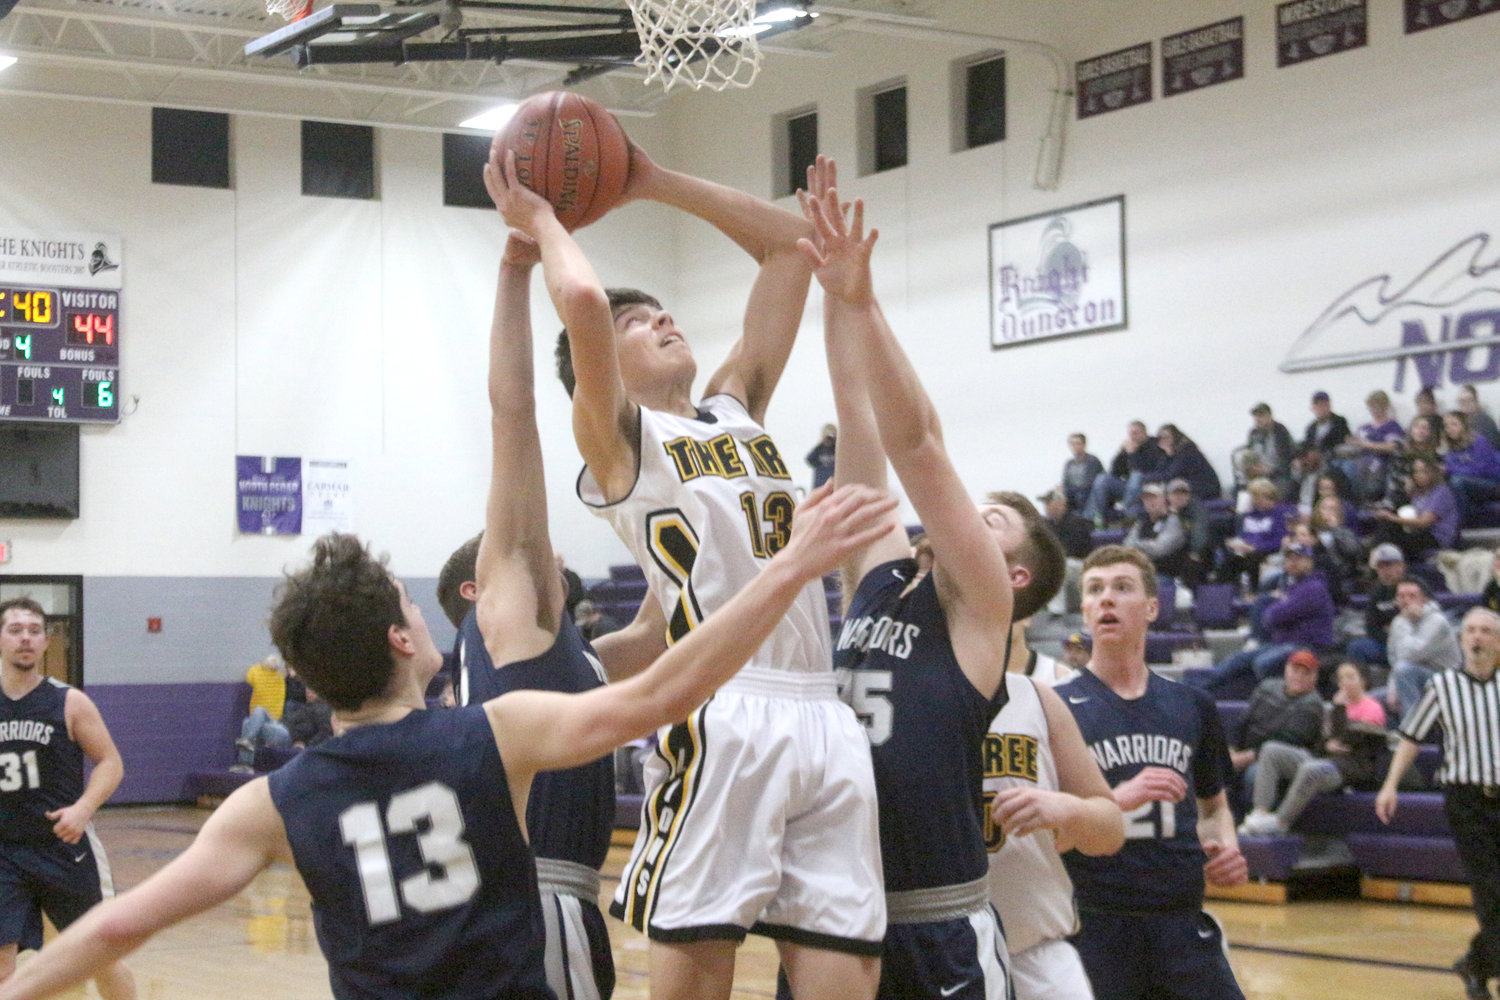 Cory Kruger goes up for a contested shot under the basket.